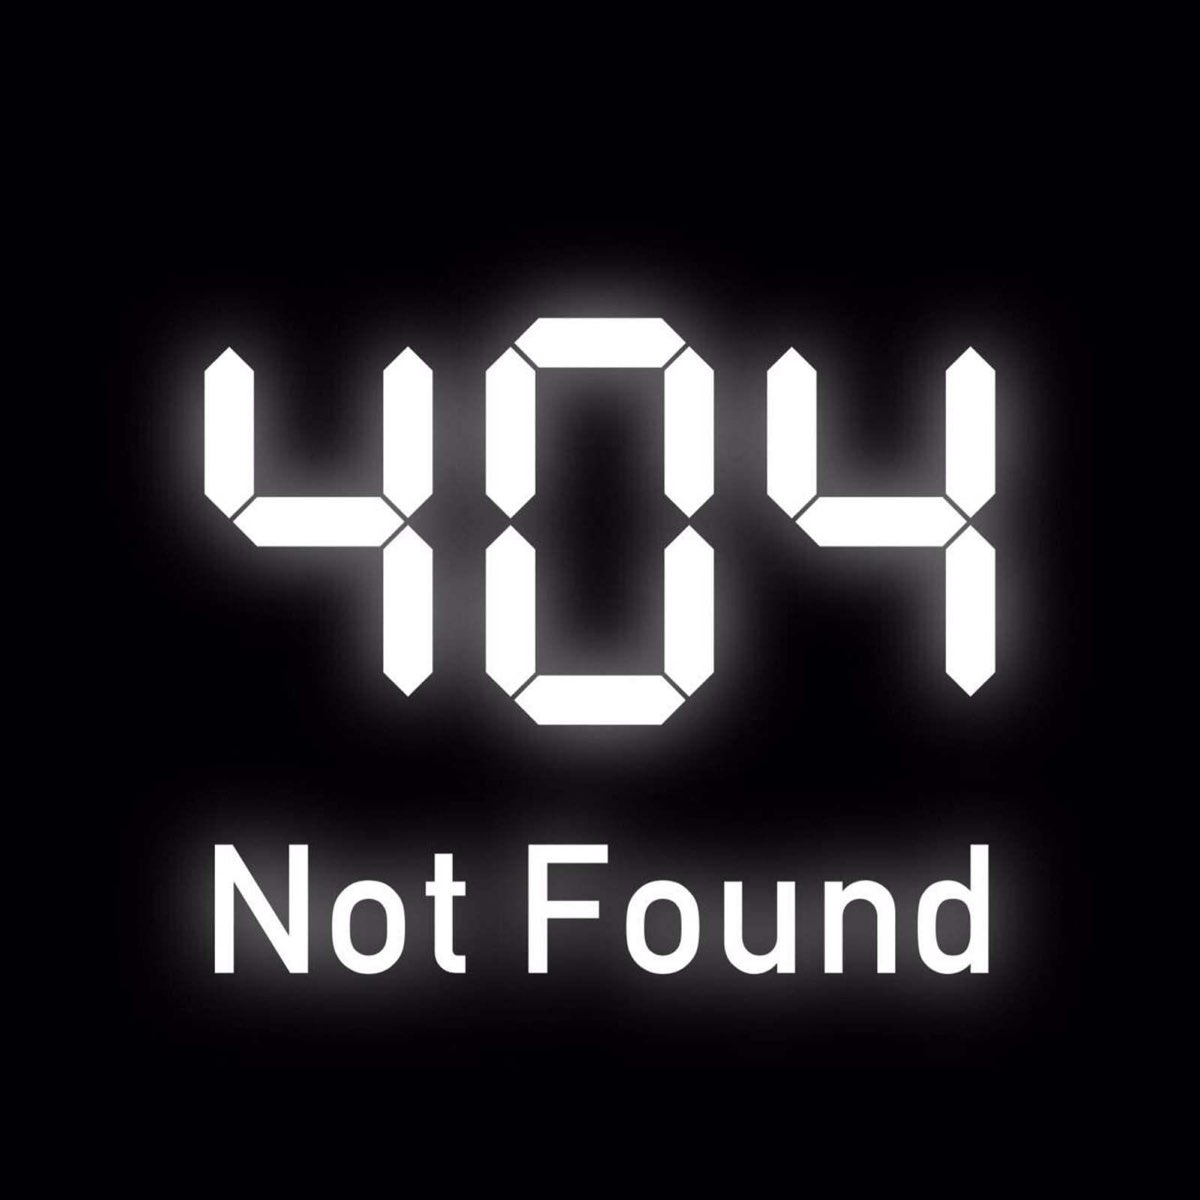 Shop not found. Not found. Error 404 not found. 404 Not found аватарка. 404 Нот фаунд.